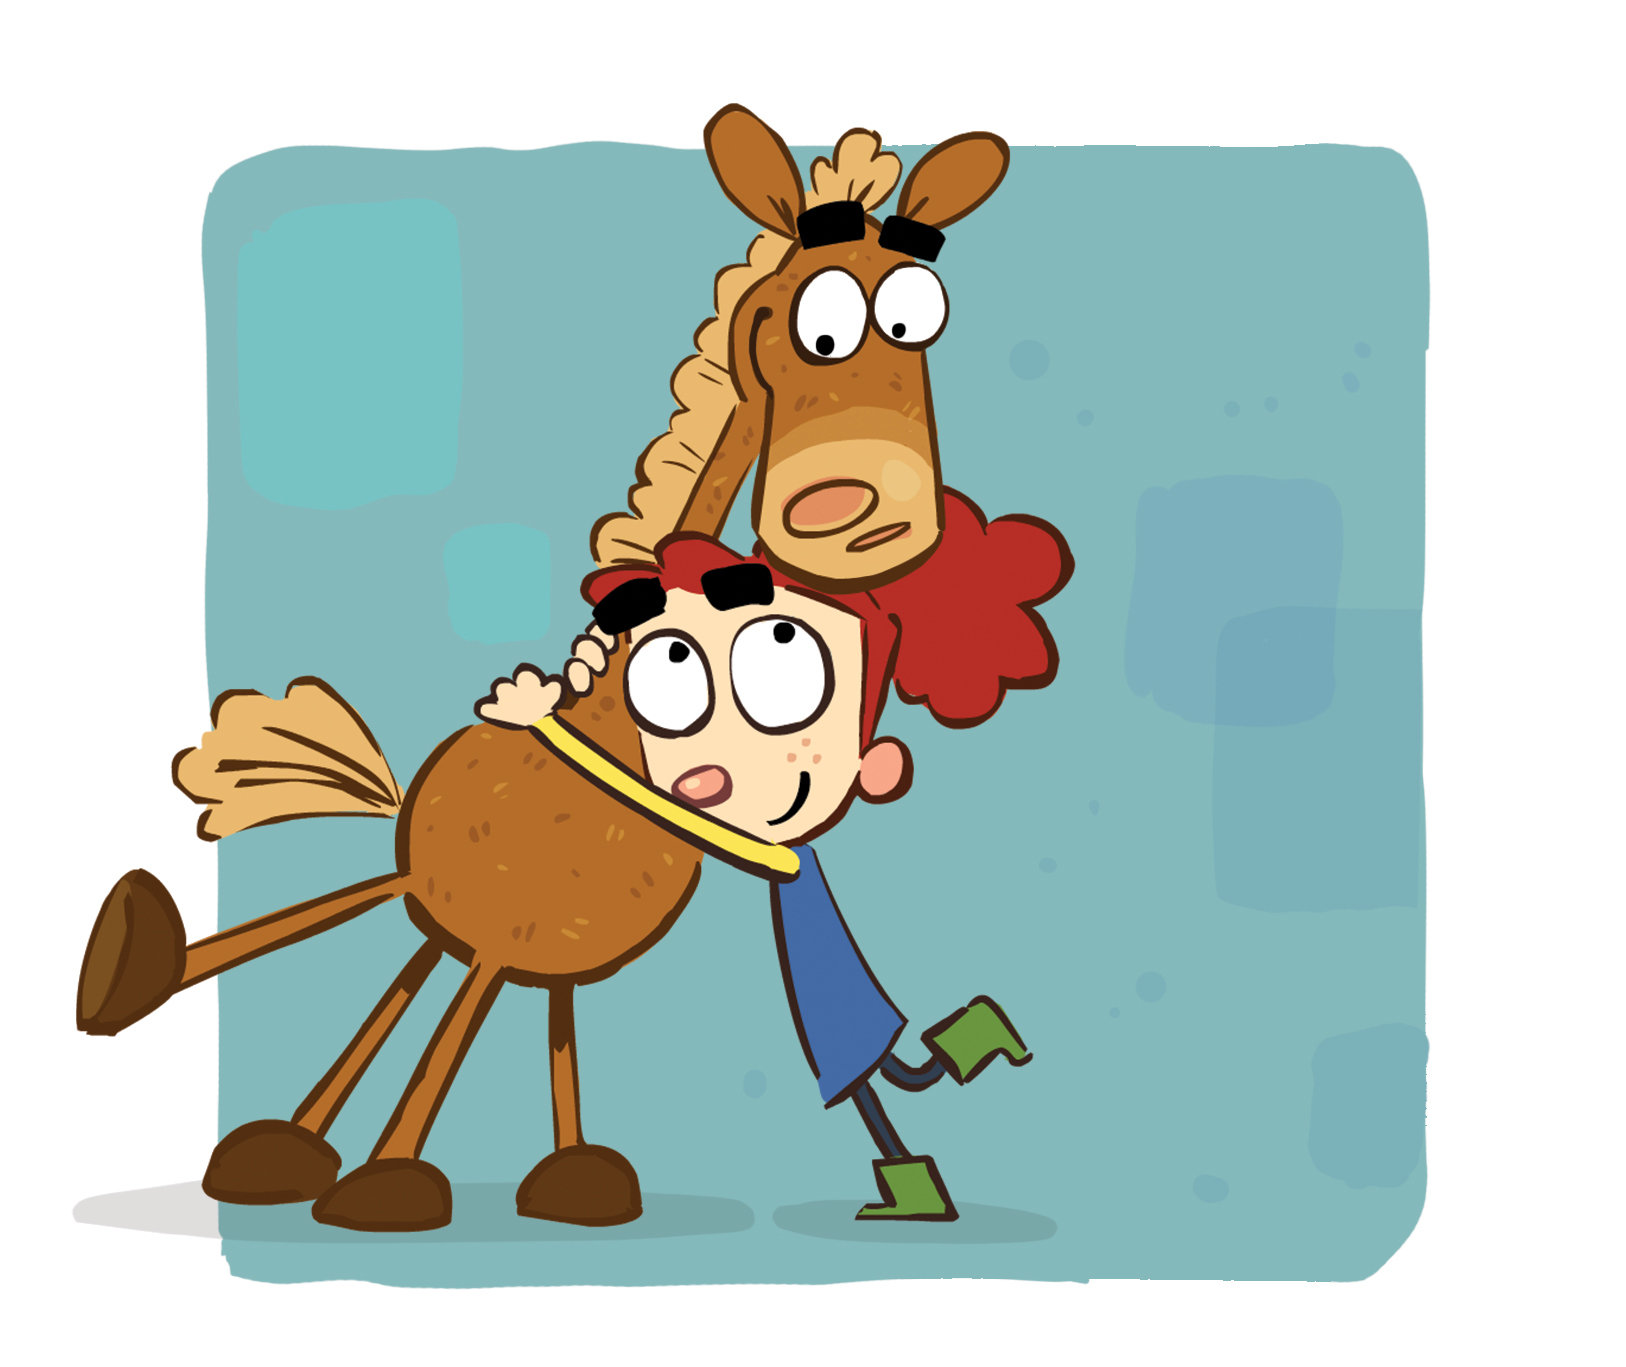 Nickelodeon Greenlights Original Animated Comedy Series Pony | Business Wire